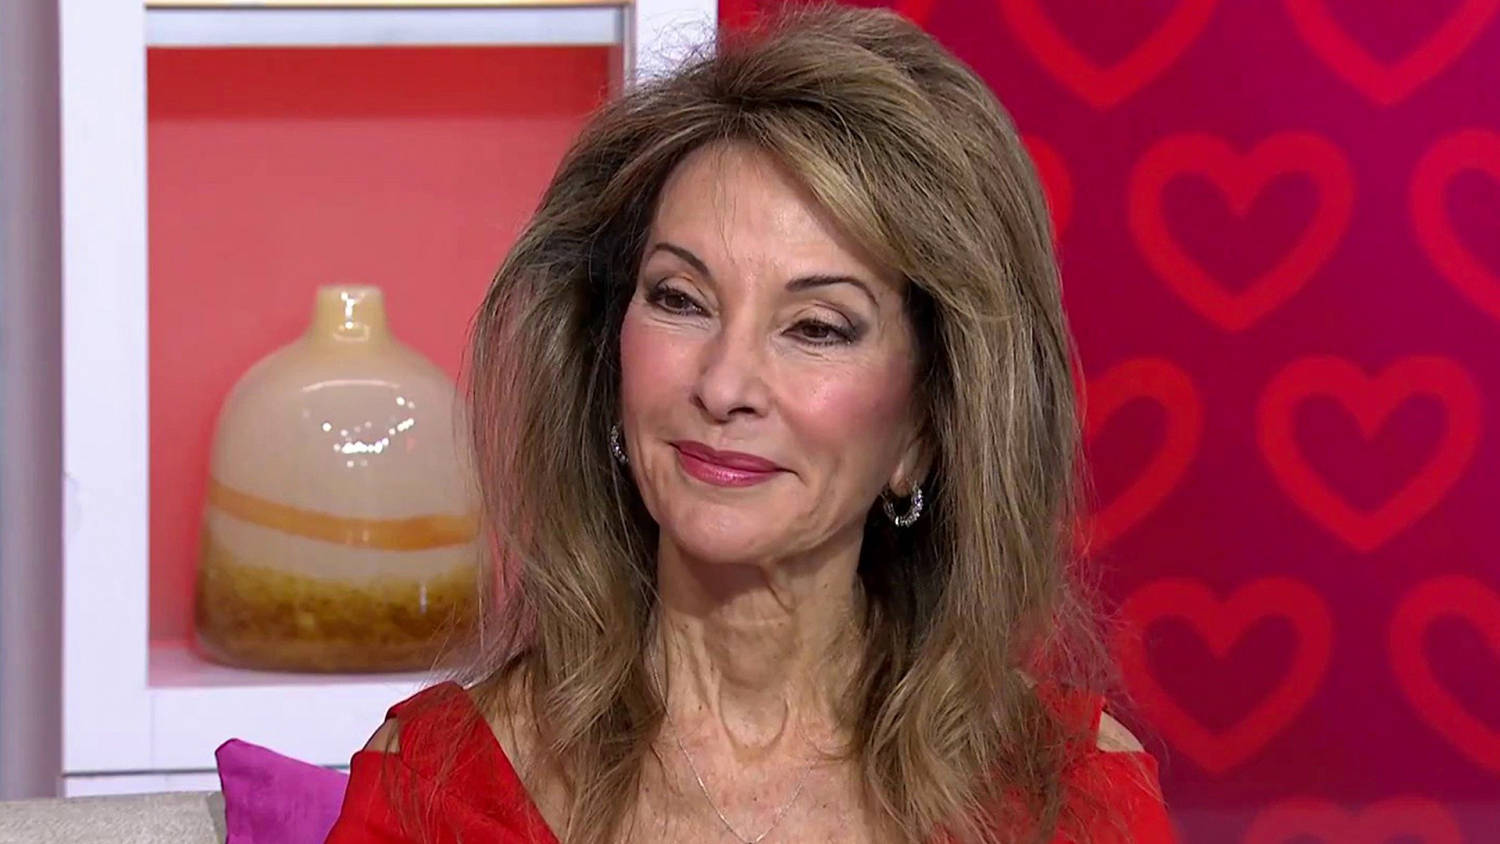 Susan Lucci Reveals She Had Emergency Heart Surgery | Newsmax.com